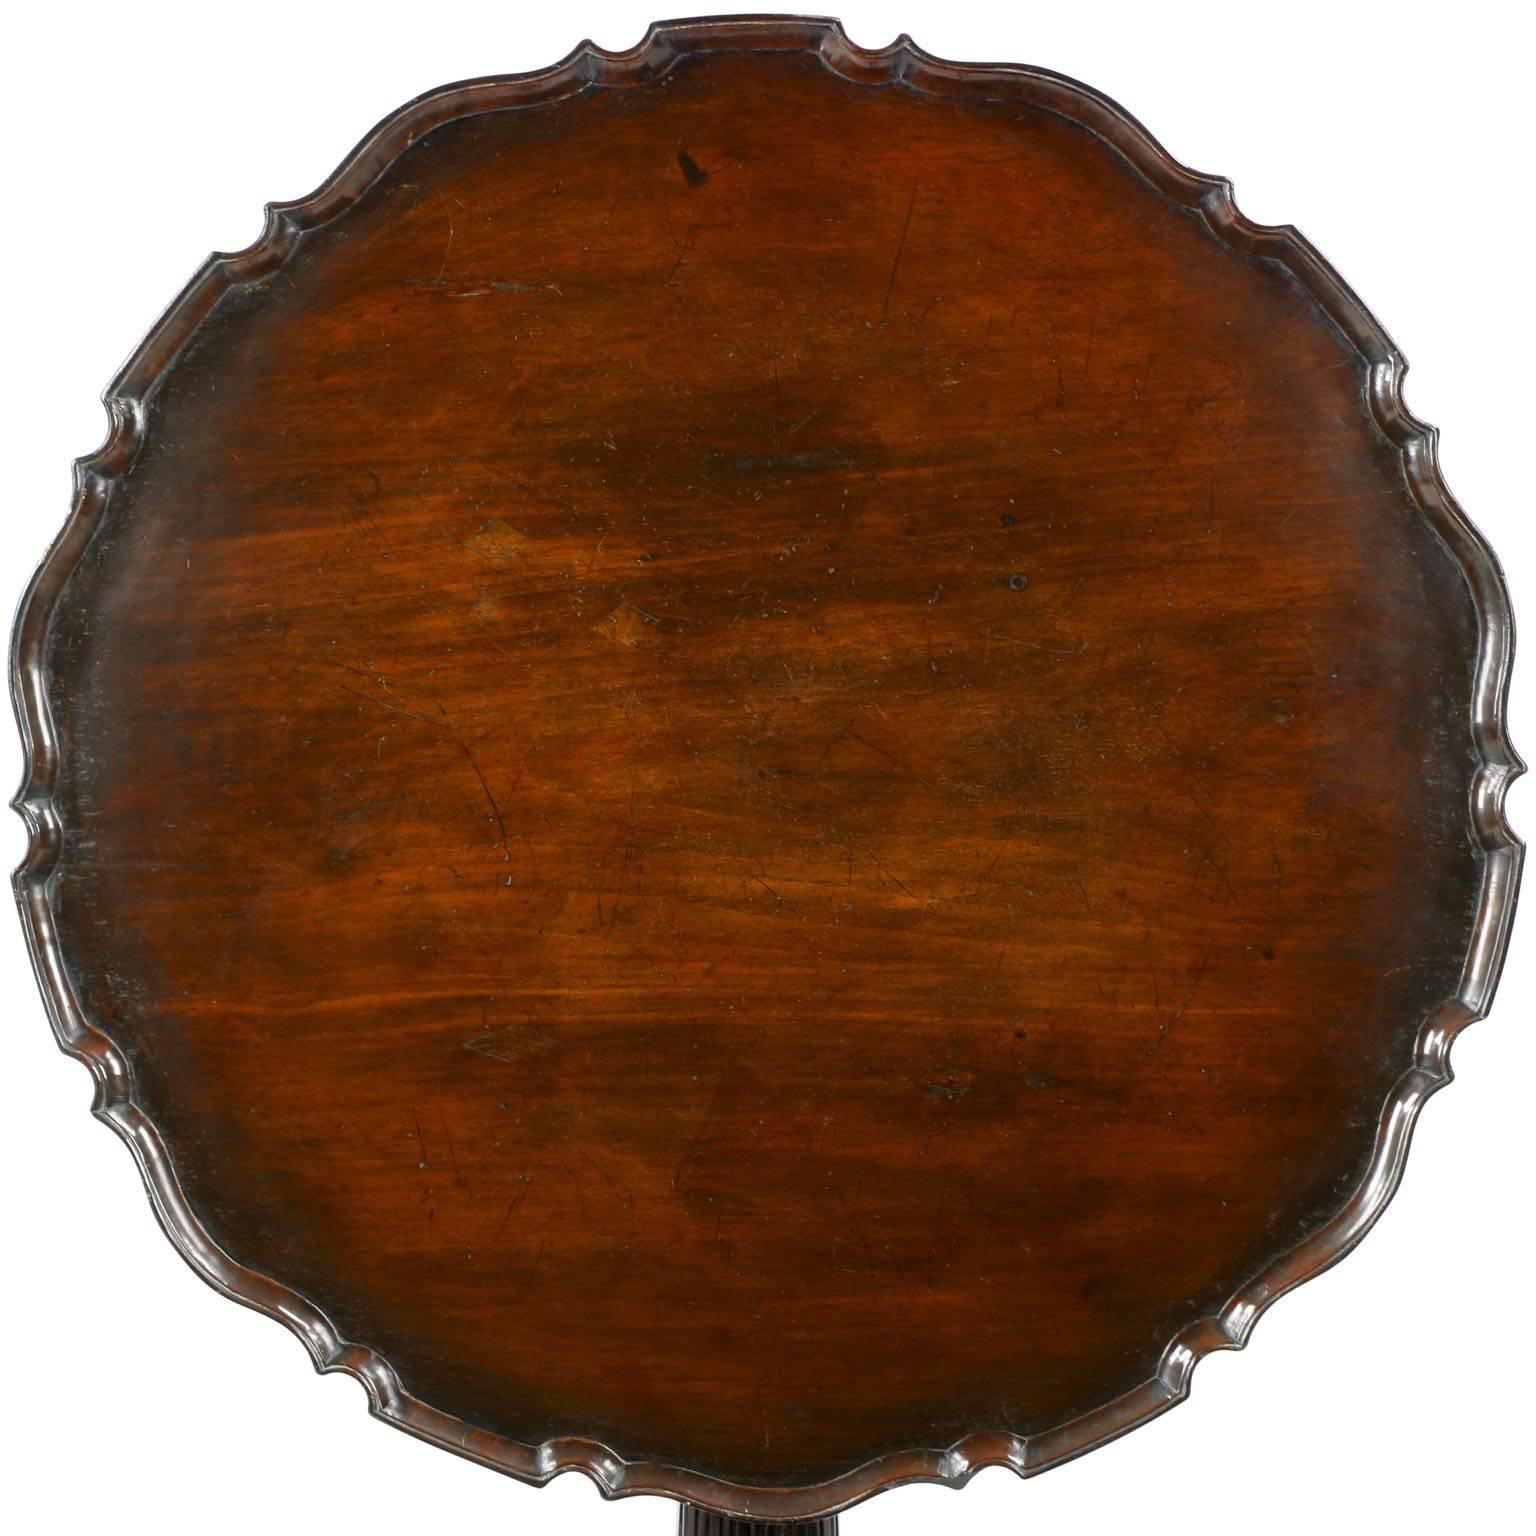 A profusely and handsomely carved piece, this beautiful George III tea table is highly developed and most striking.  The pie crust is painstakingly formed by first affixing to a lathe, carefully turning until the rim becomes raised, scroll cutting